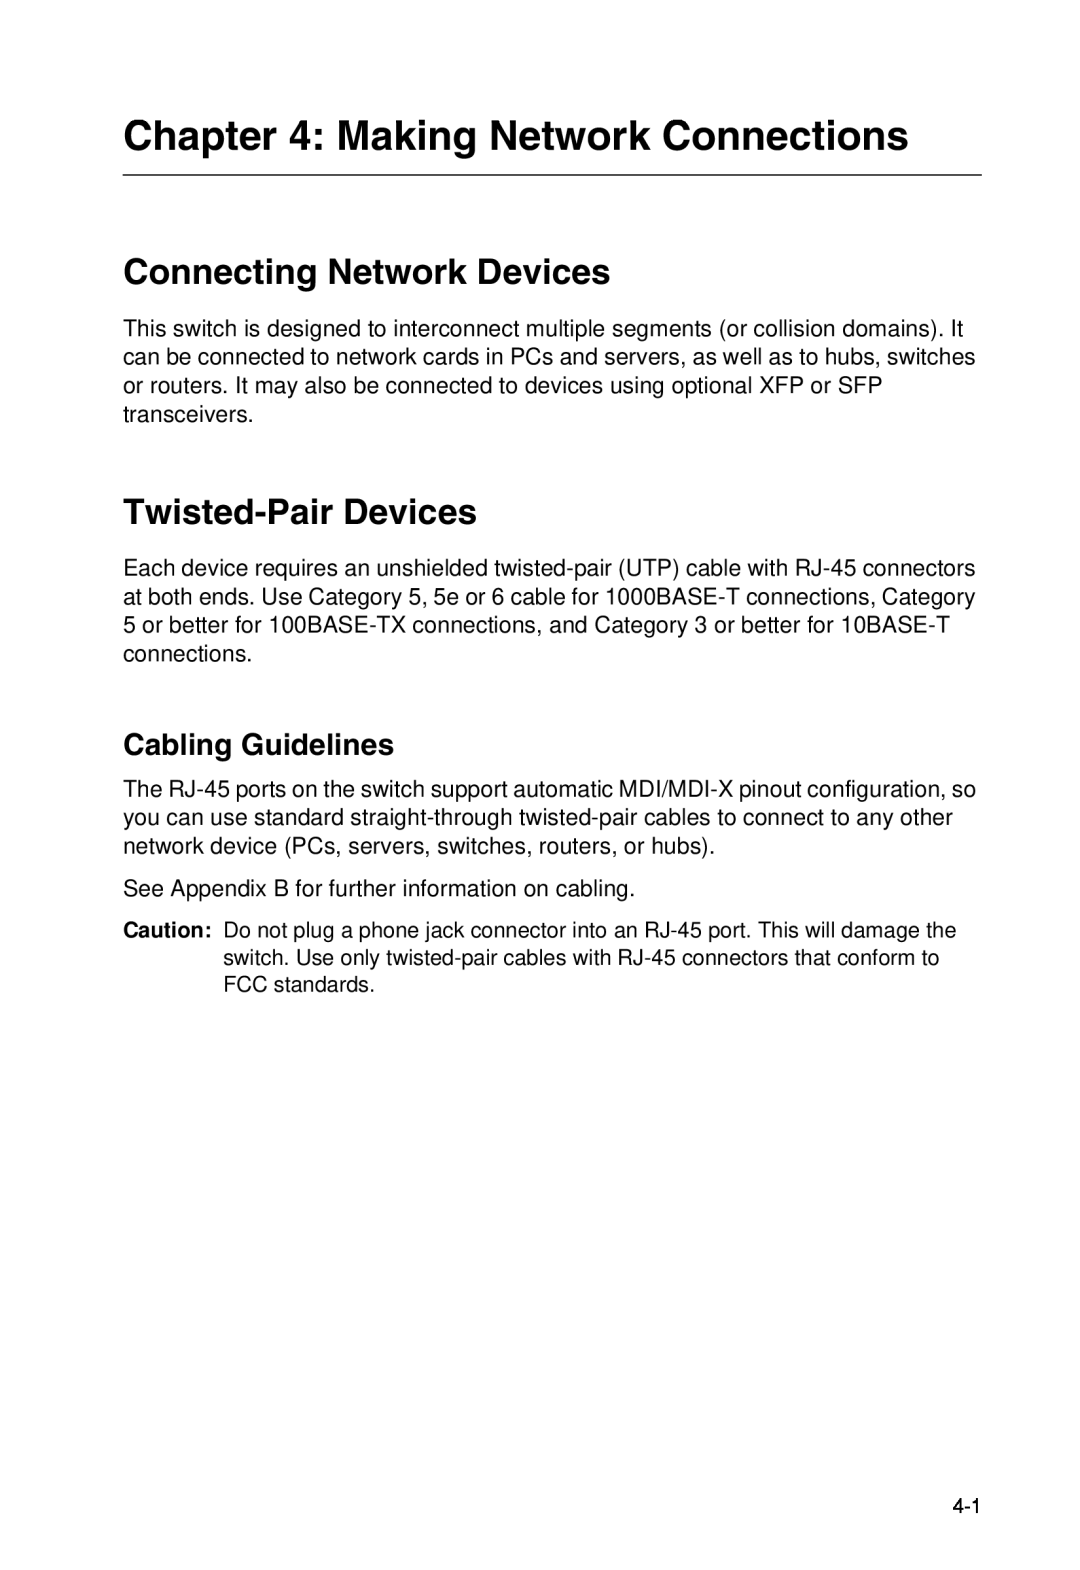 SMC Networks SMC8950EM Making Network Connections, Connecting Network Devices, Twisted-Pair Devices, Cabling Guidelines 